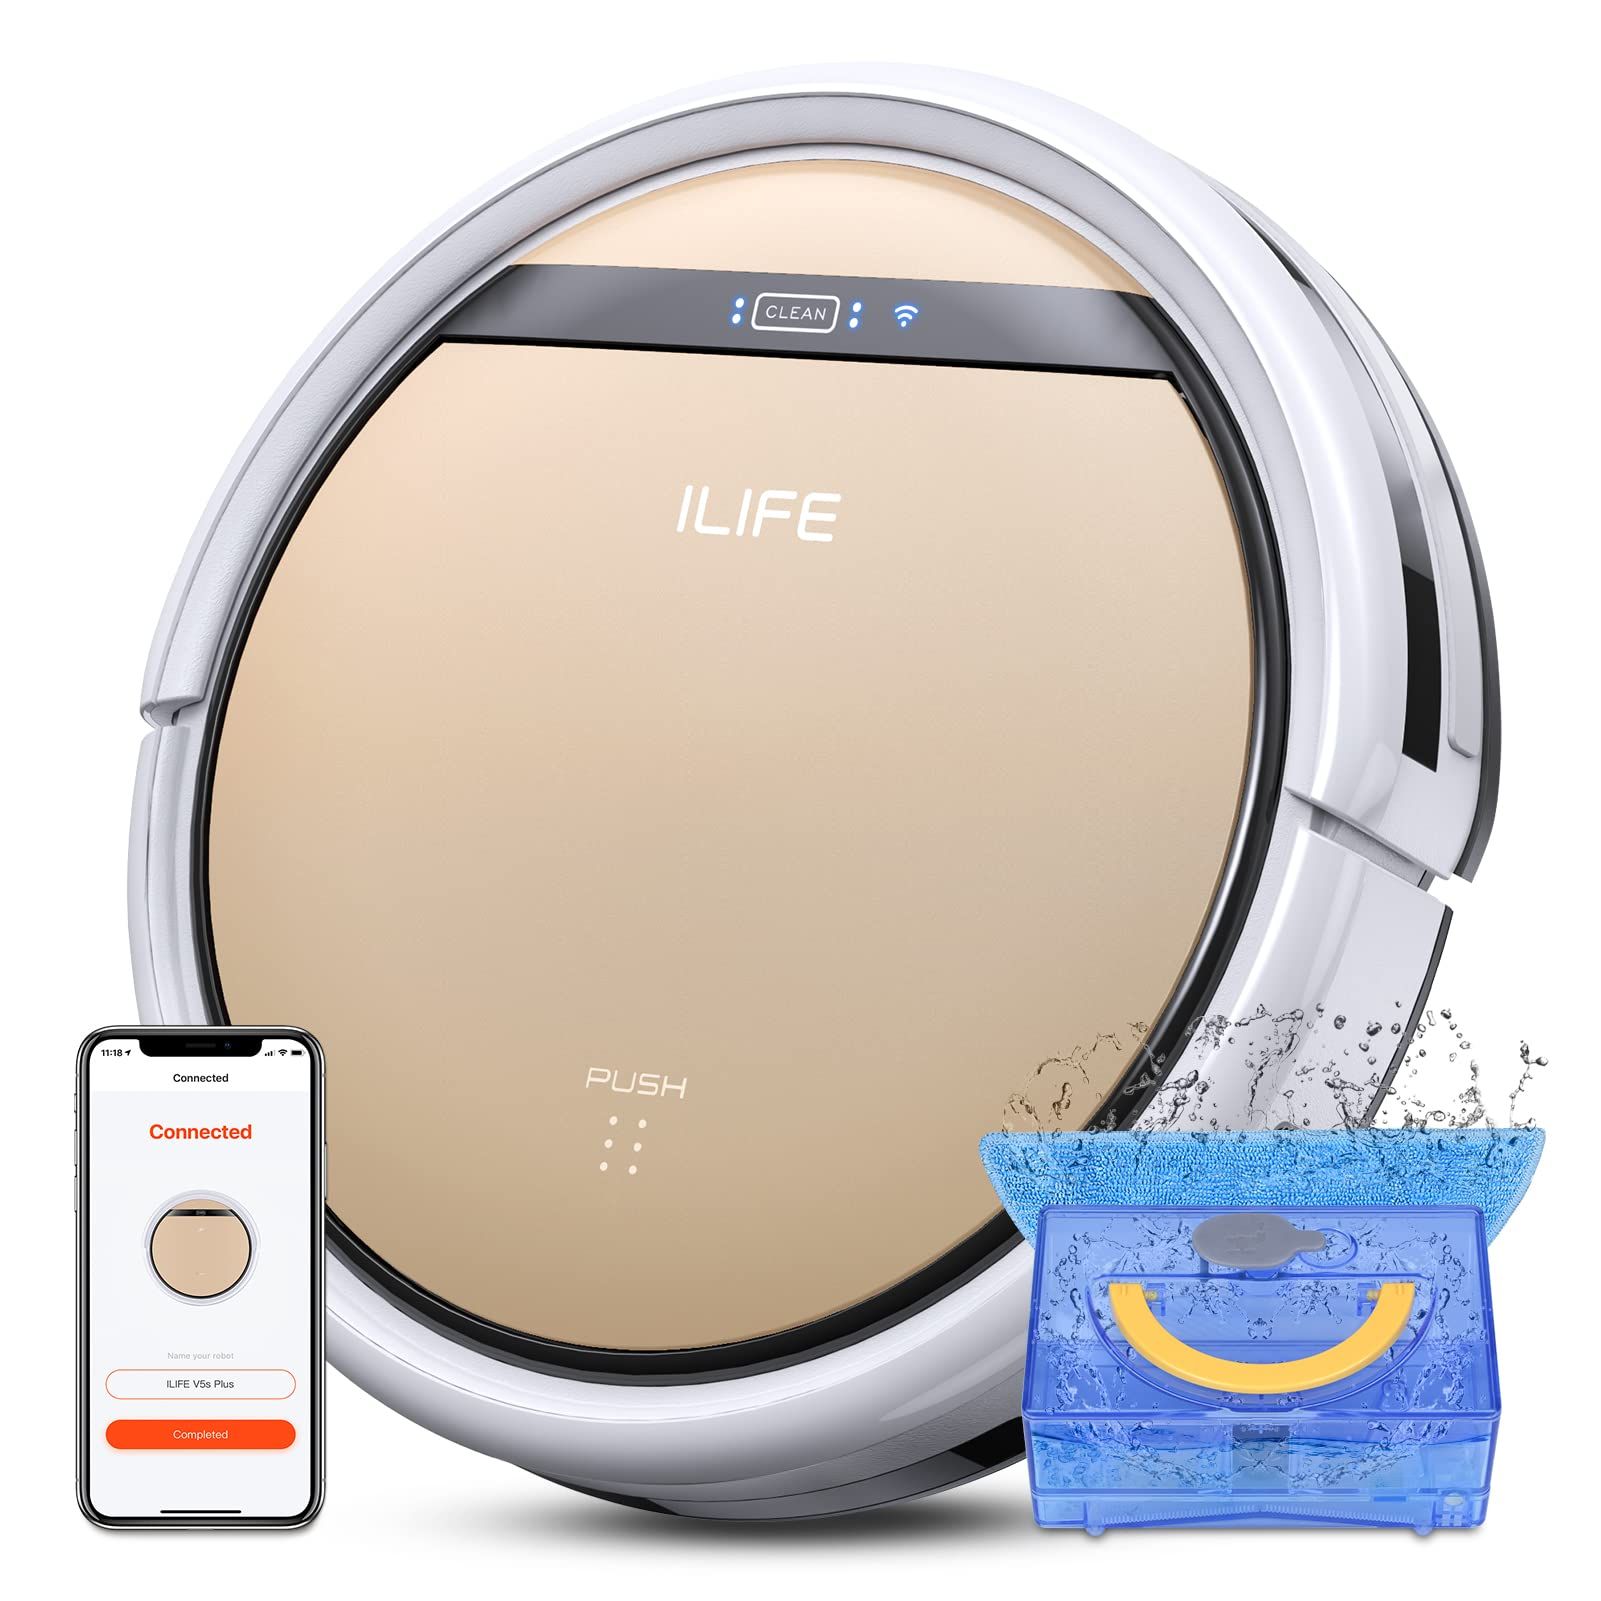 ILIFE V5s Plus Robot Vacuum and Mop Combo with Wi-Fi/App/Alexa, Automatic Self-Charging Robotic Vacuum Cleaner, Slim and Quiet, Cleans Hard Floors Carpets and Pet Hair (V5s Pro Upgrade Version) | Amazon (CA)